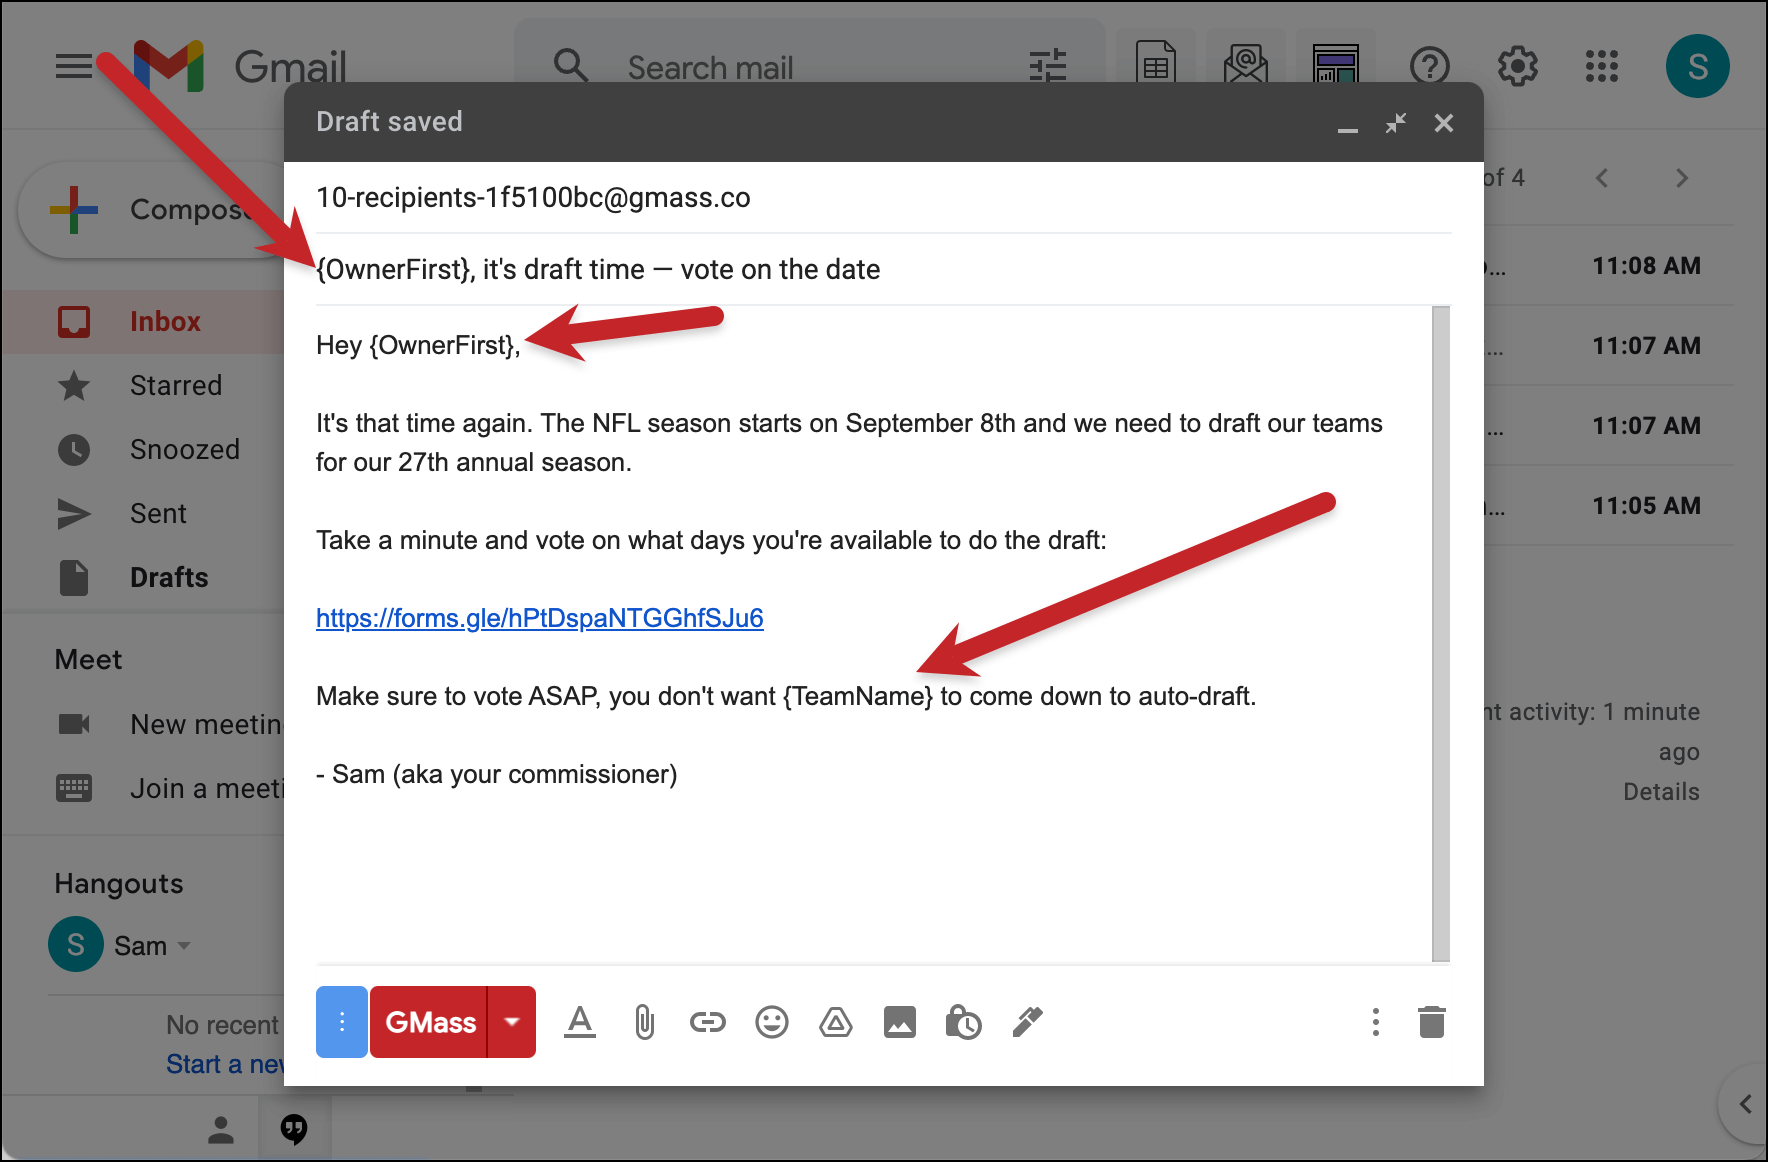 Using the merge fields in the email